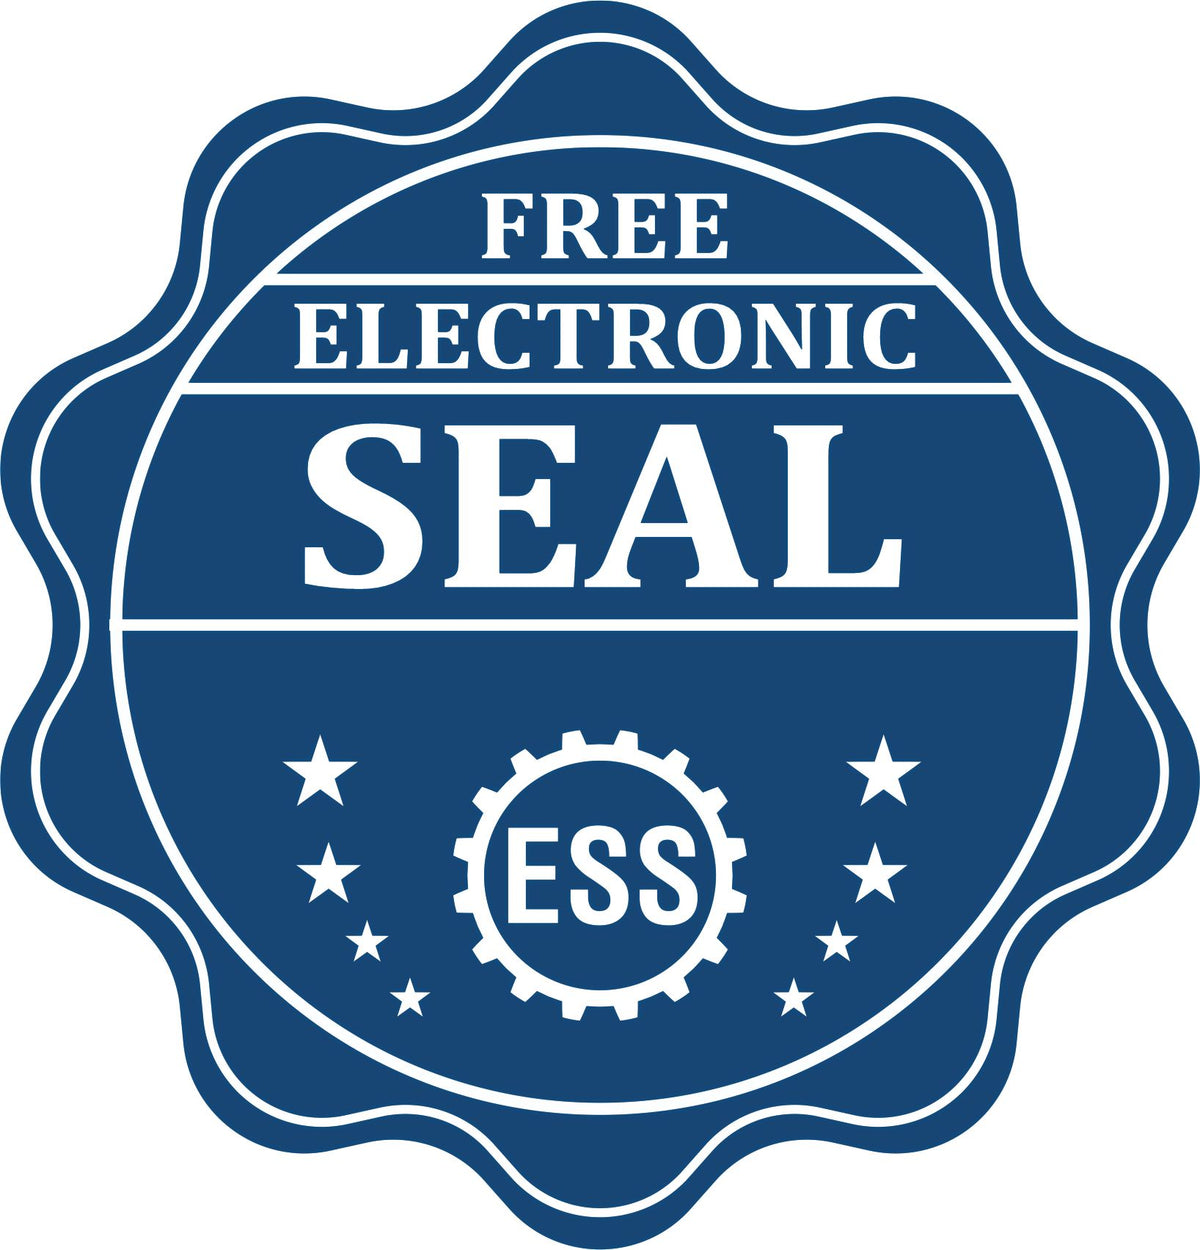 A badge showing a free electronic seal for the Premium MaxLight Pre-Inked Massachusetts Geology Stamp with stars and the ESS gear on the emblem.